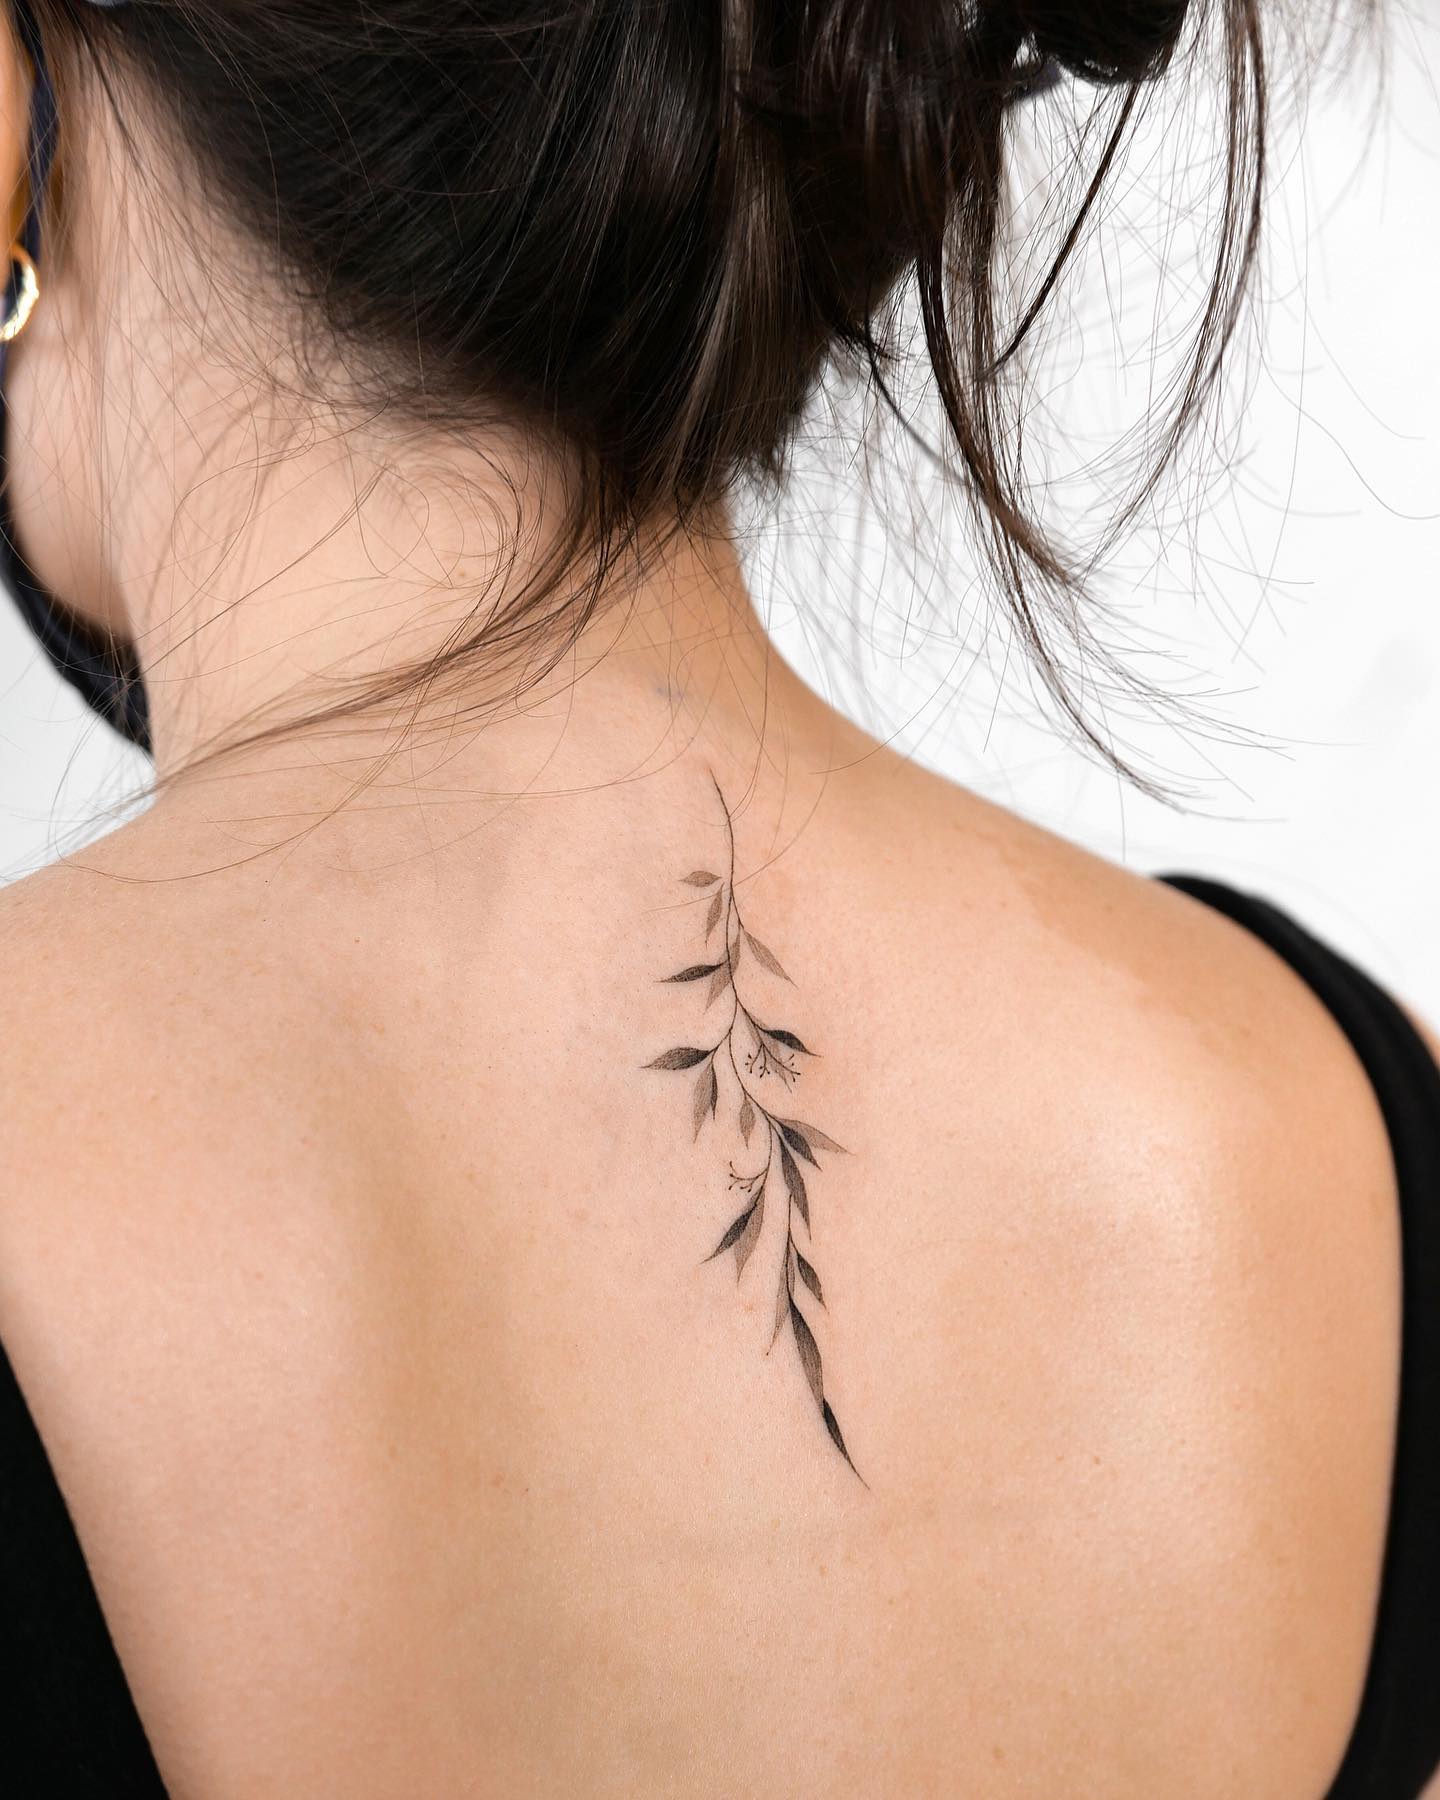 If you want to look chic with your leaf tattoo, one of the best tattoo for you is definitely this one. The leaves going down on your back will make you stand out.